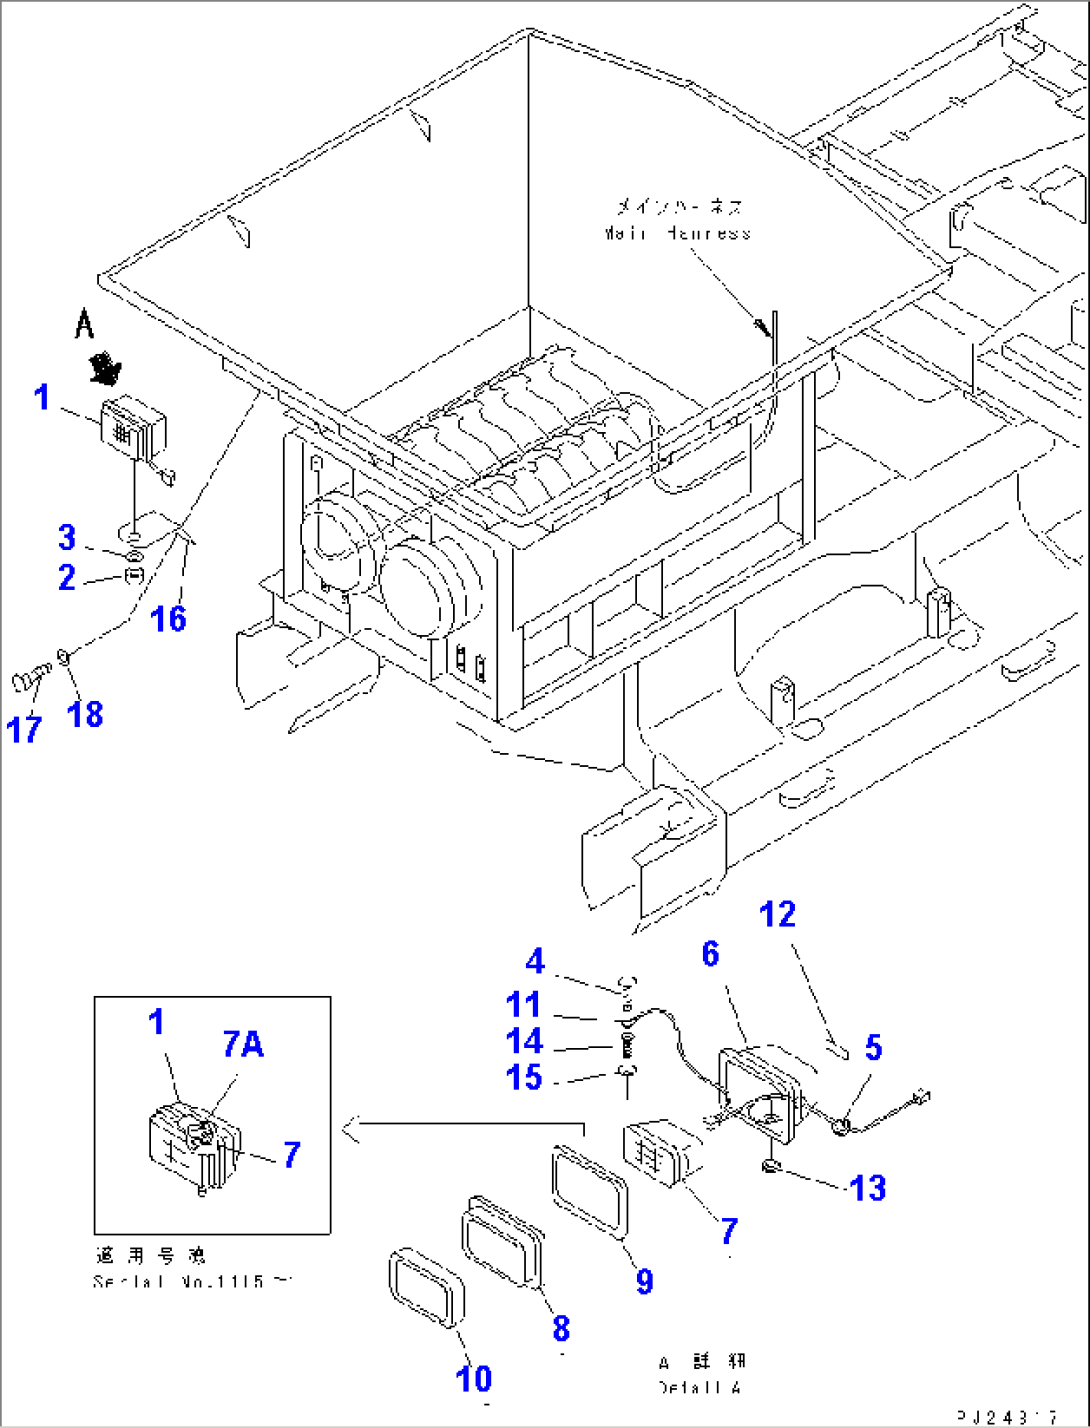 ELECTRICAL SYSTEM (6/10) (FRONT LAMP)